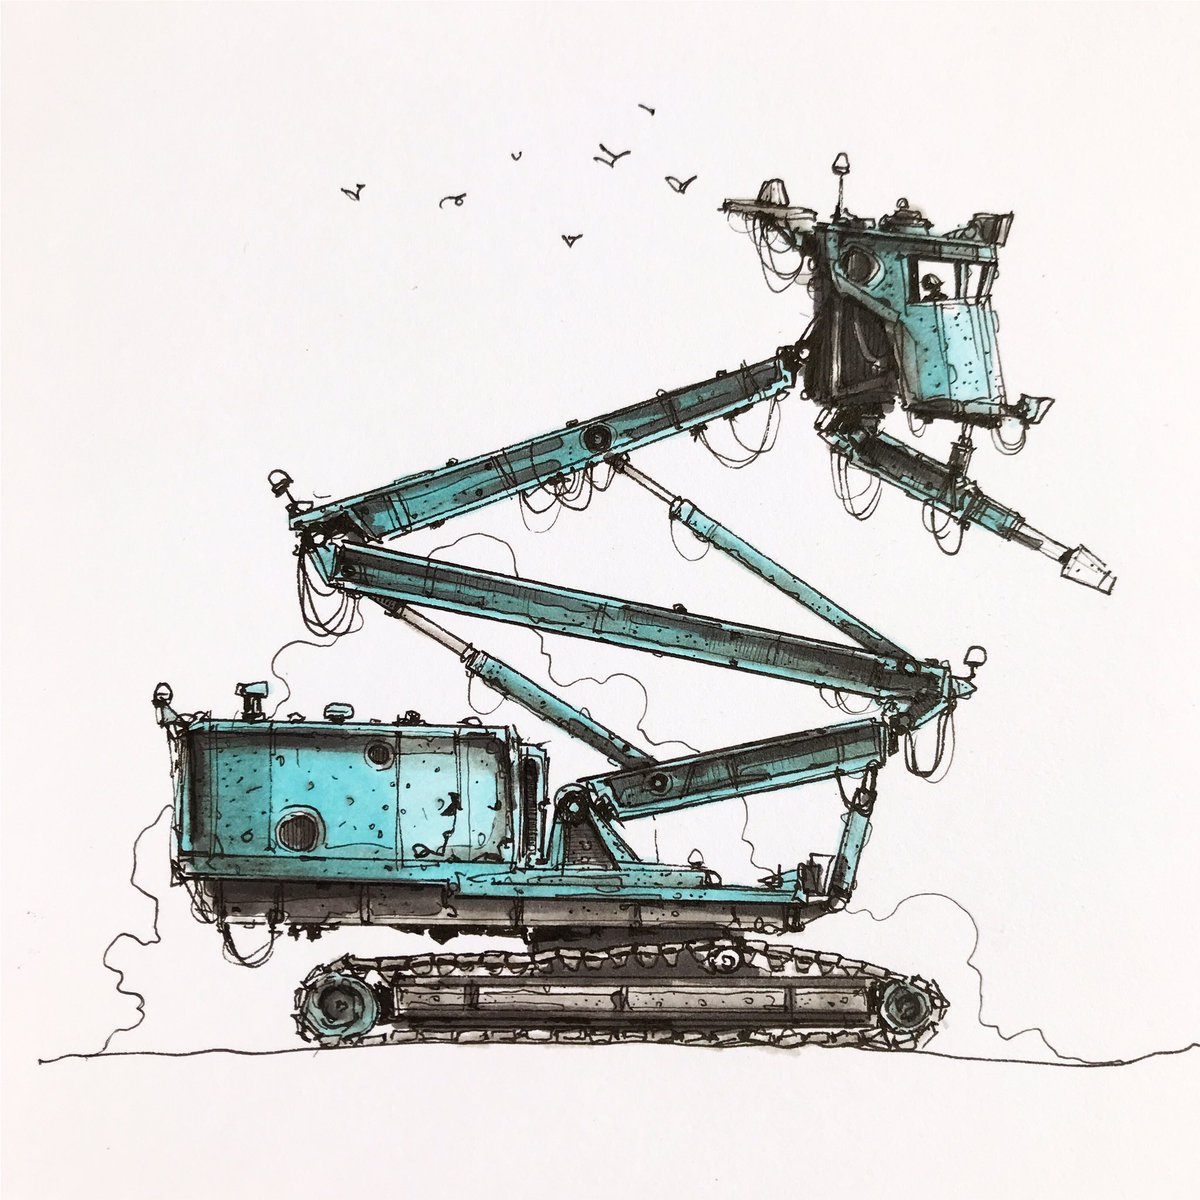 Such a handy demolisher may be very helpful 😆 (Oli inside 👷‍♂️). And color is nice ☺️.
.
#tinymachinery.
.
.
#kobelco #illustration #excavatorlife #demolition